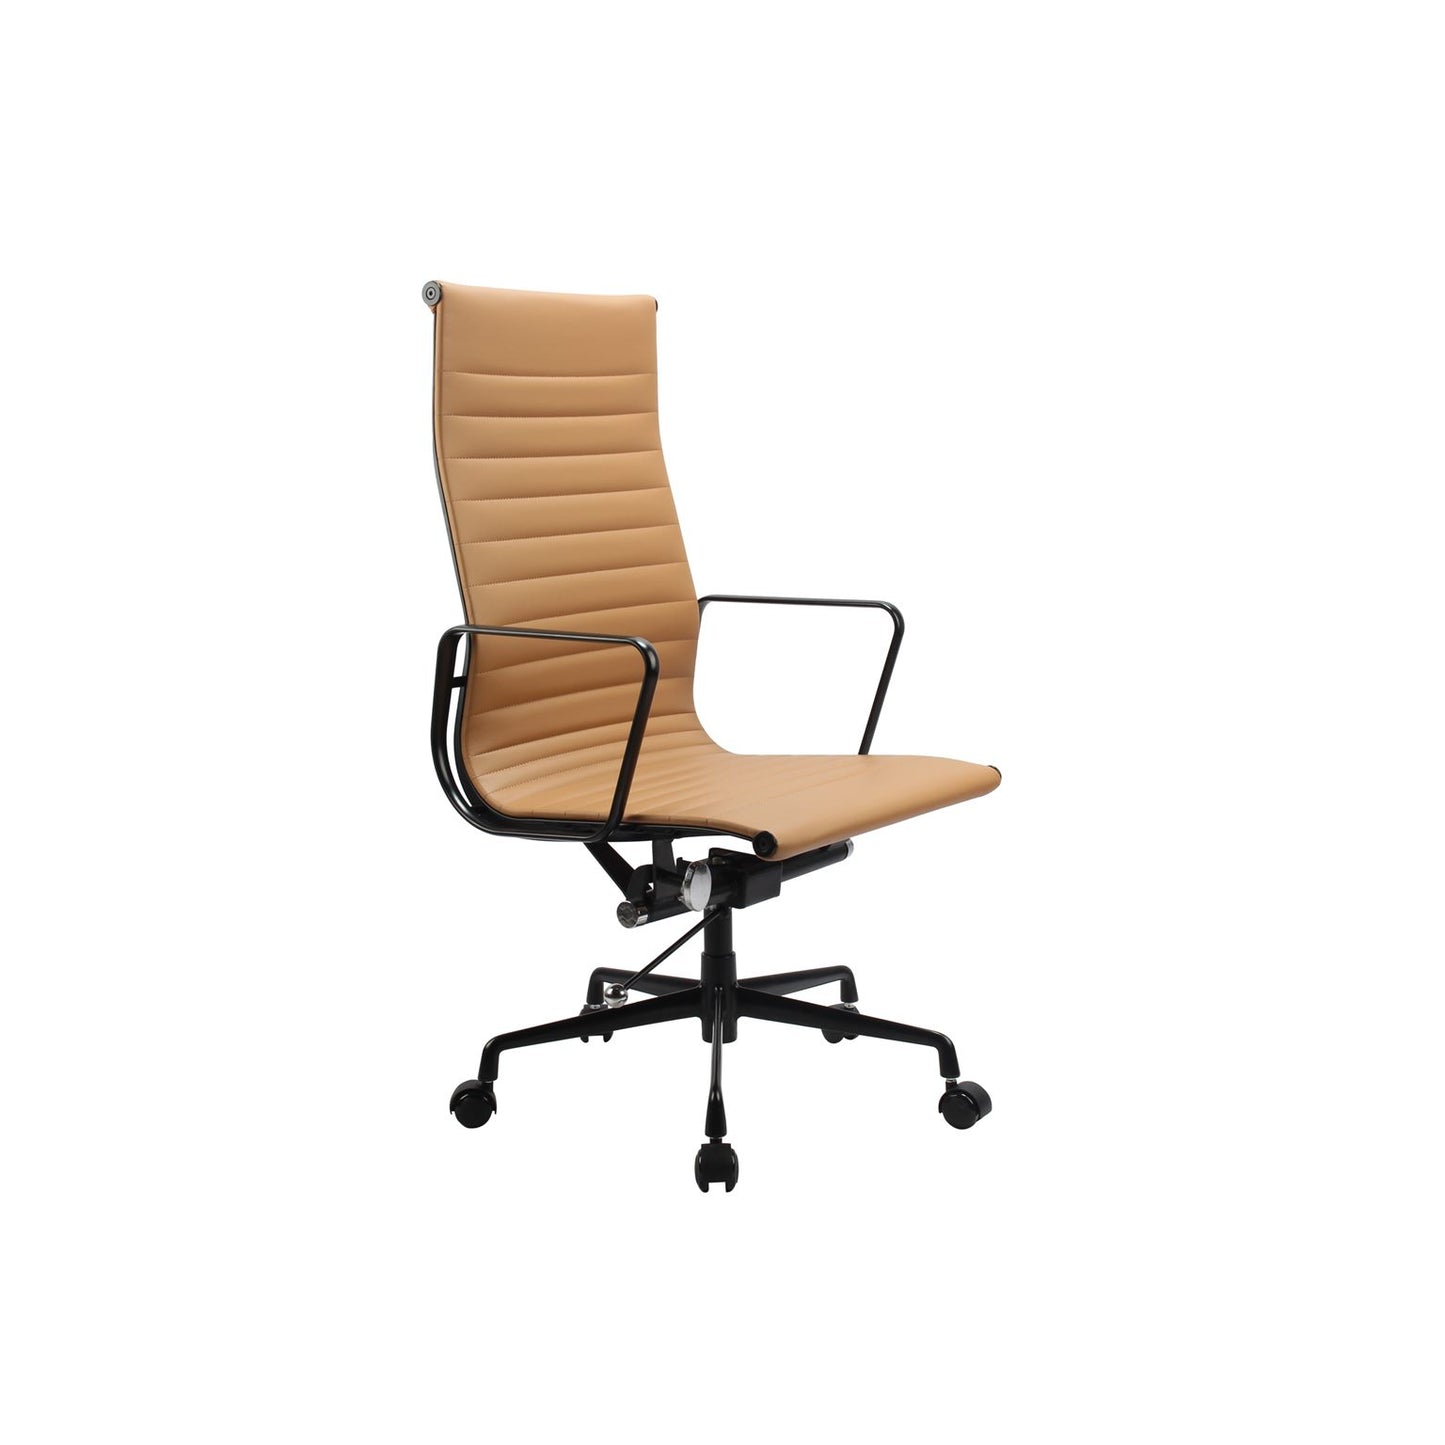 Replica Genuine Leather High Back Office Chair Beige color in stock